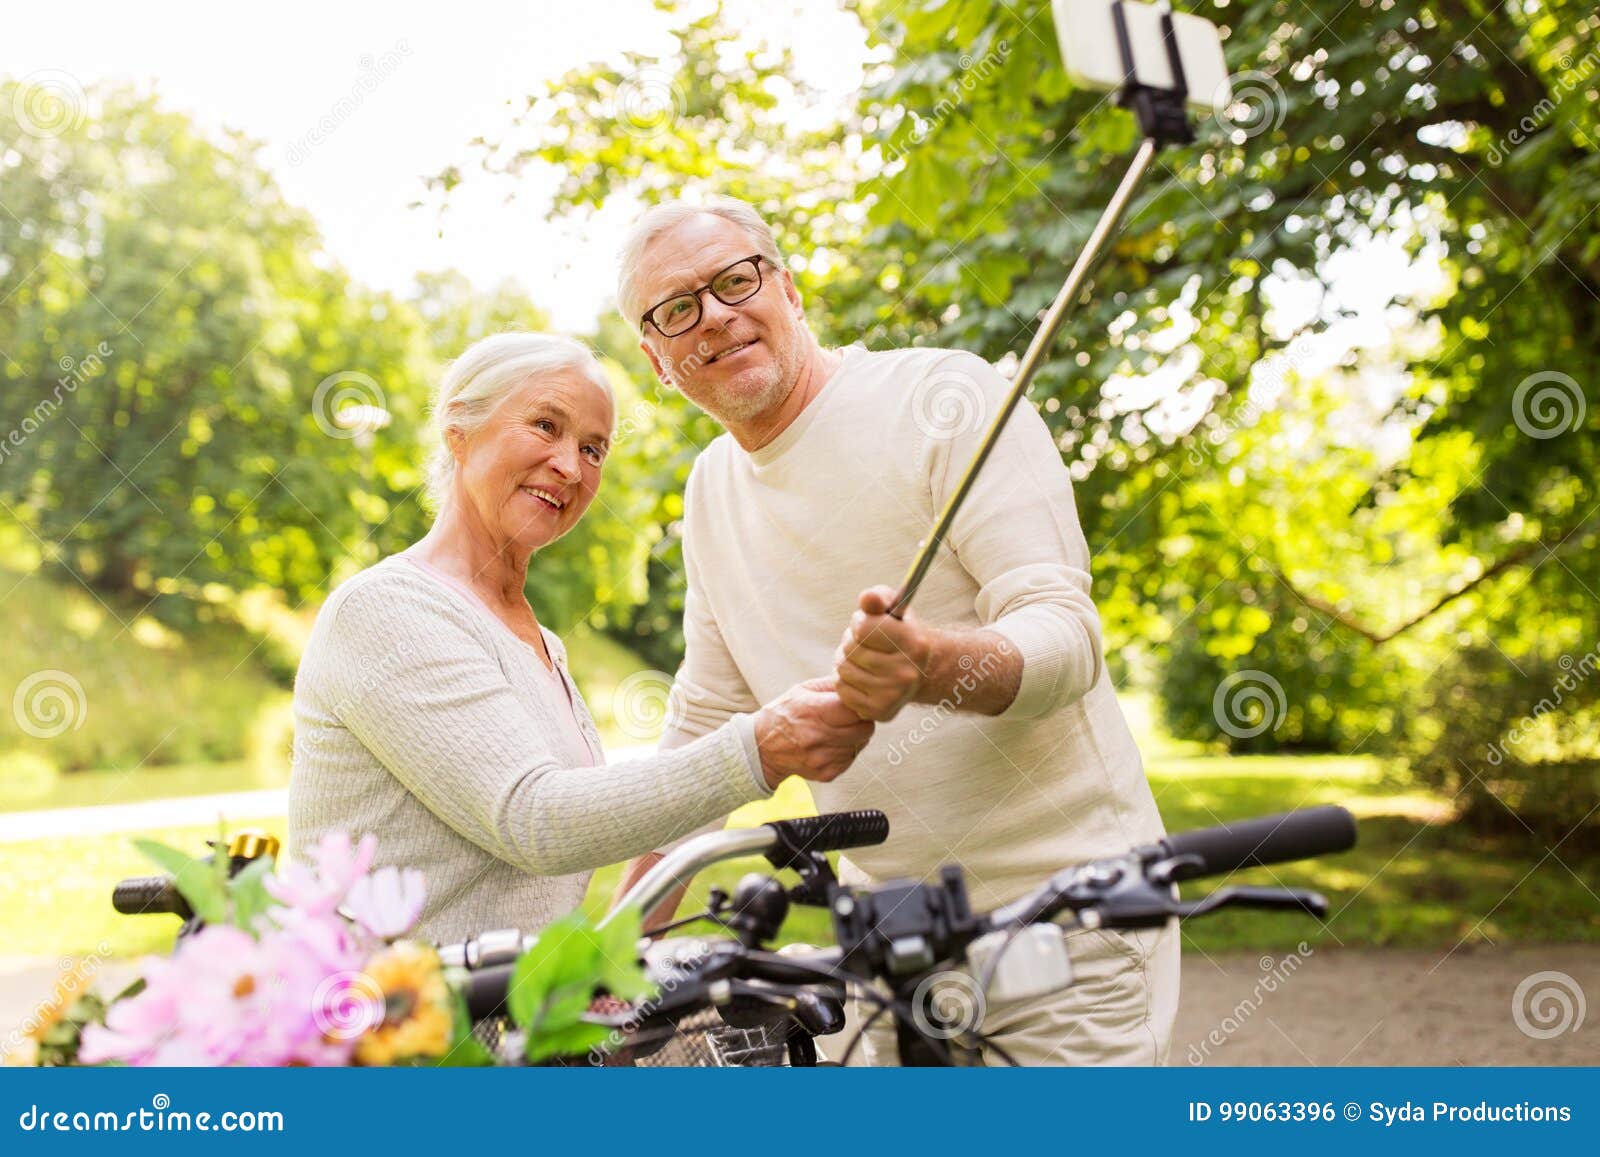 Senior Couple With Bicycles Taking Selfie At Park Stock Photo Image